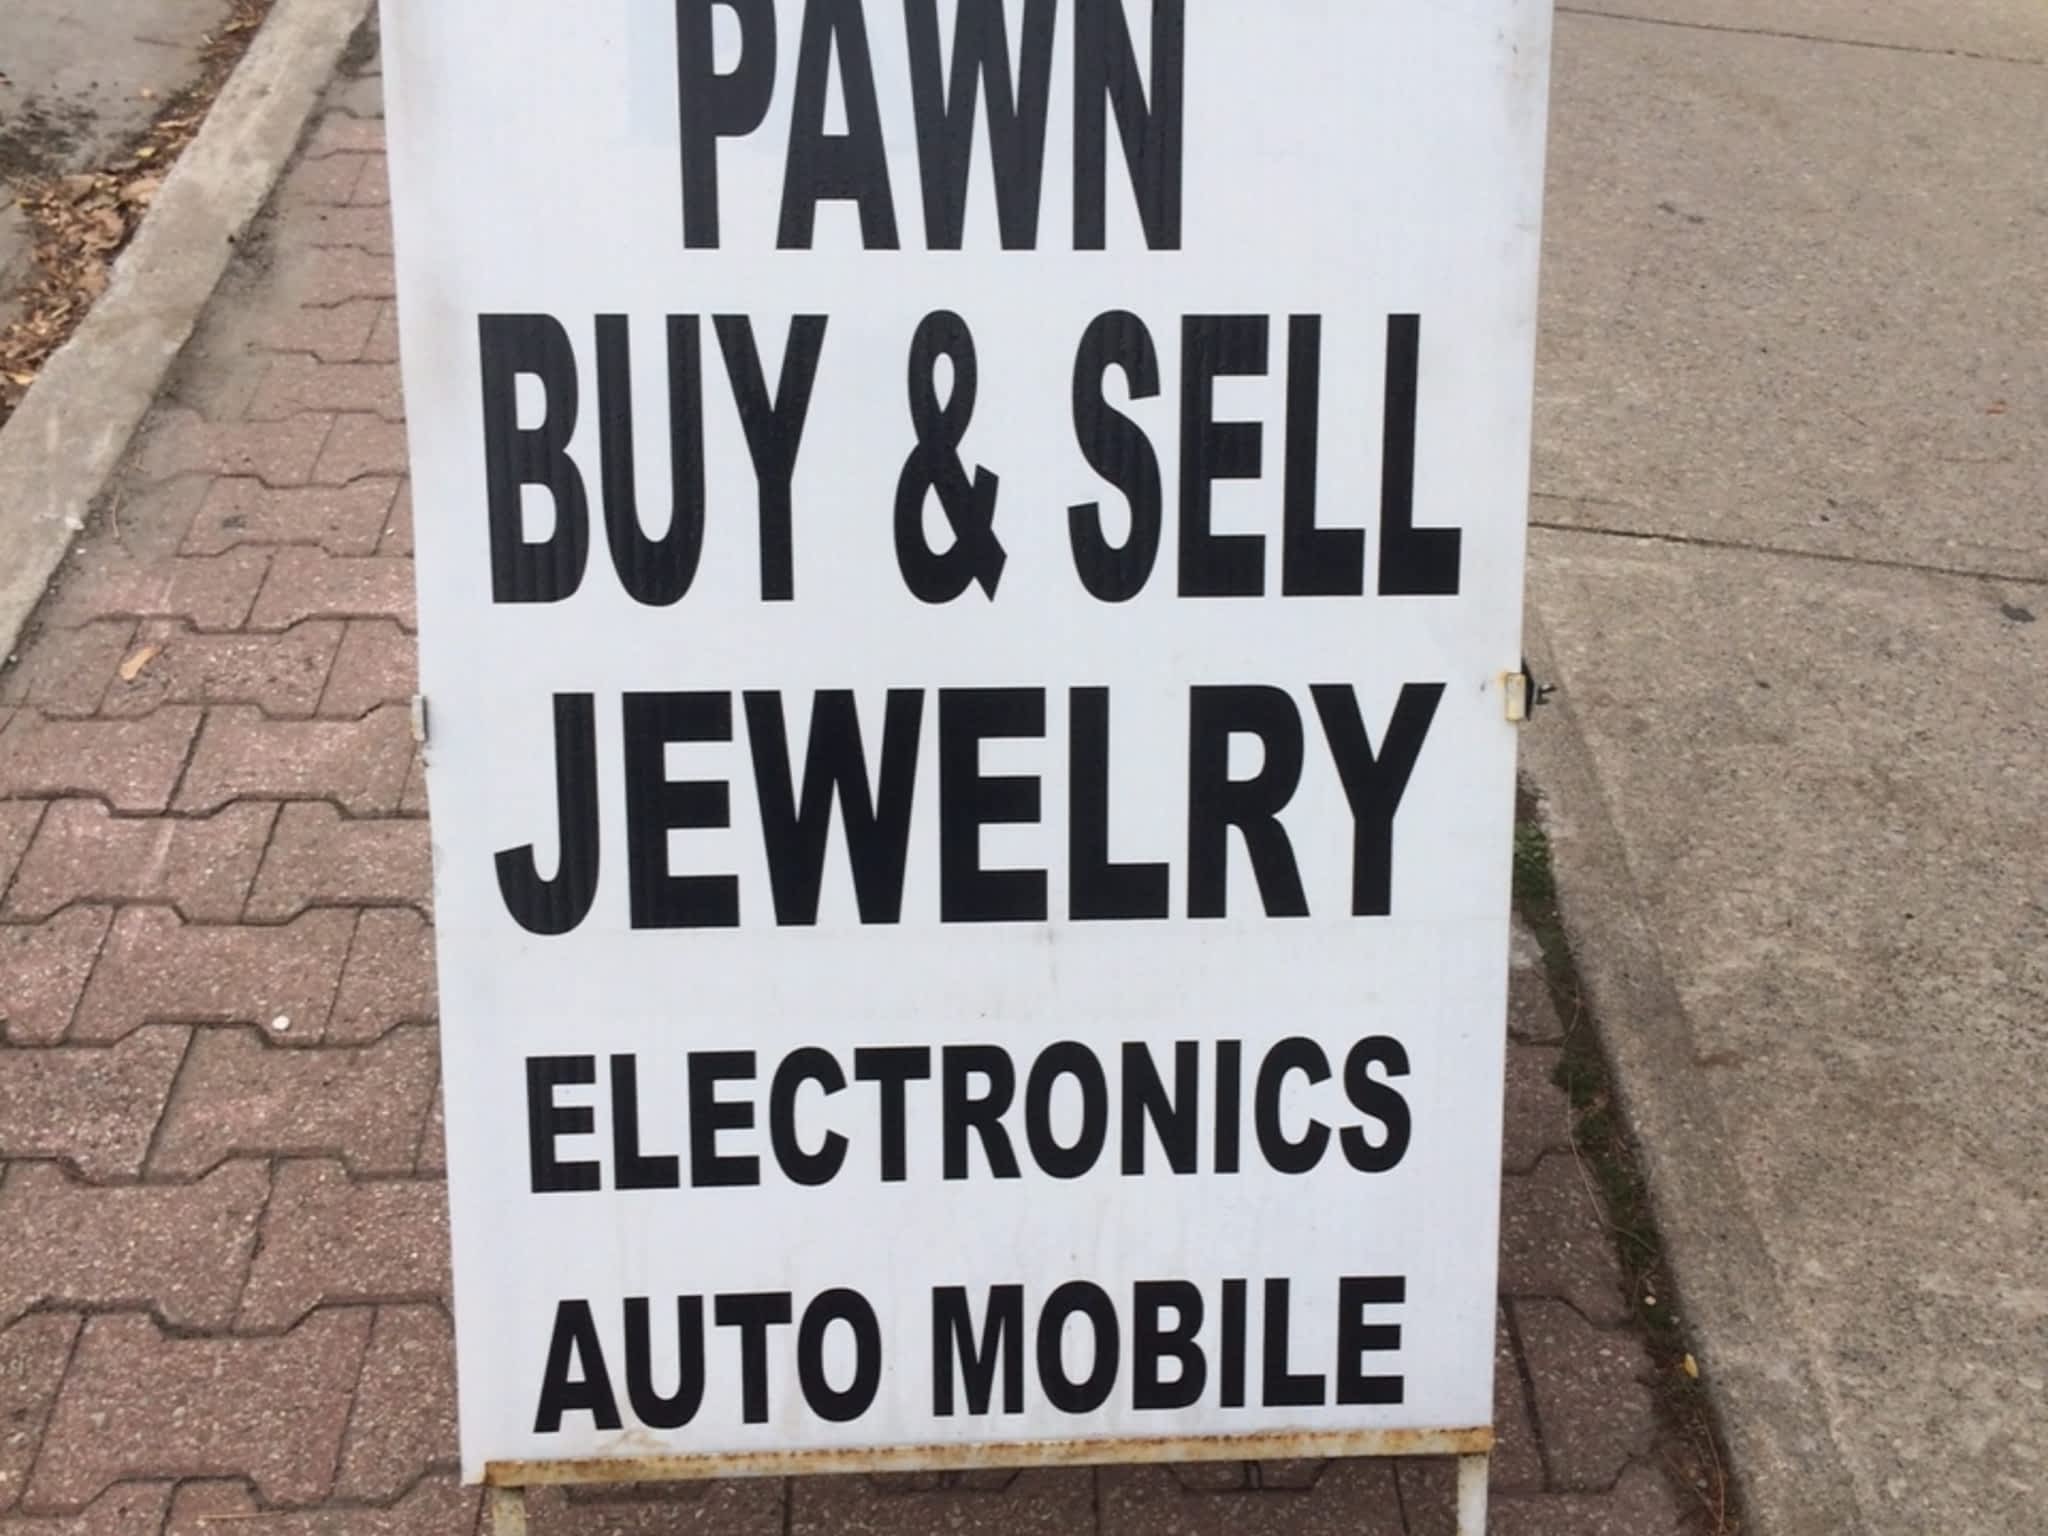 photo Sunny Jewelry and Pawn Shop